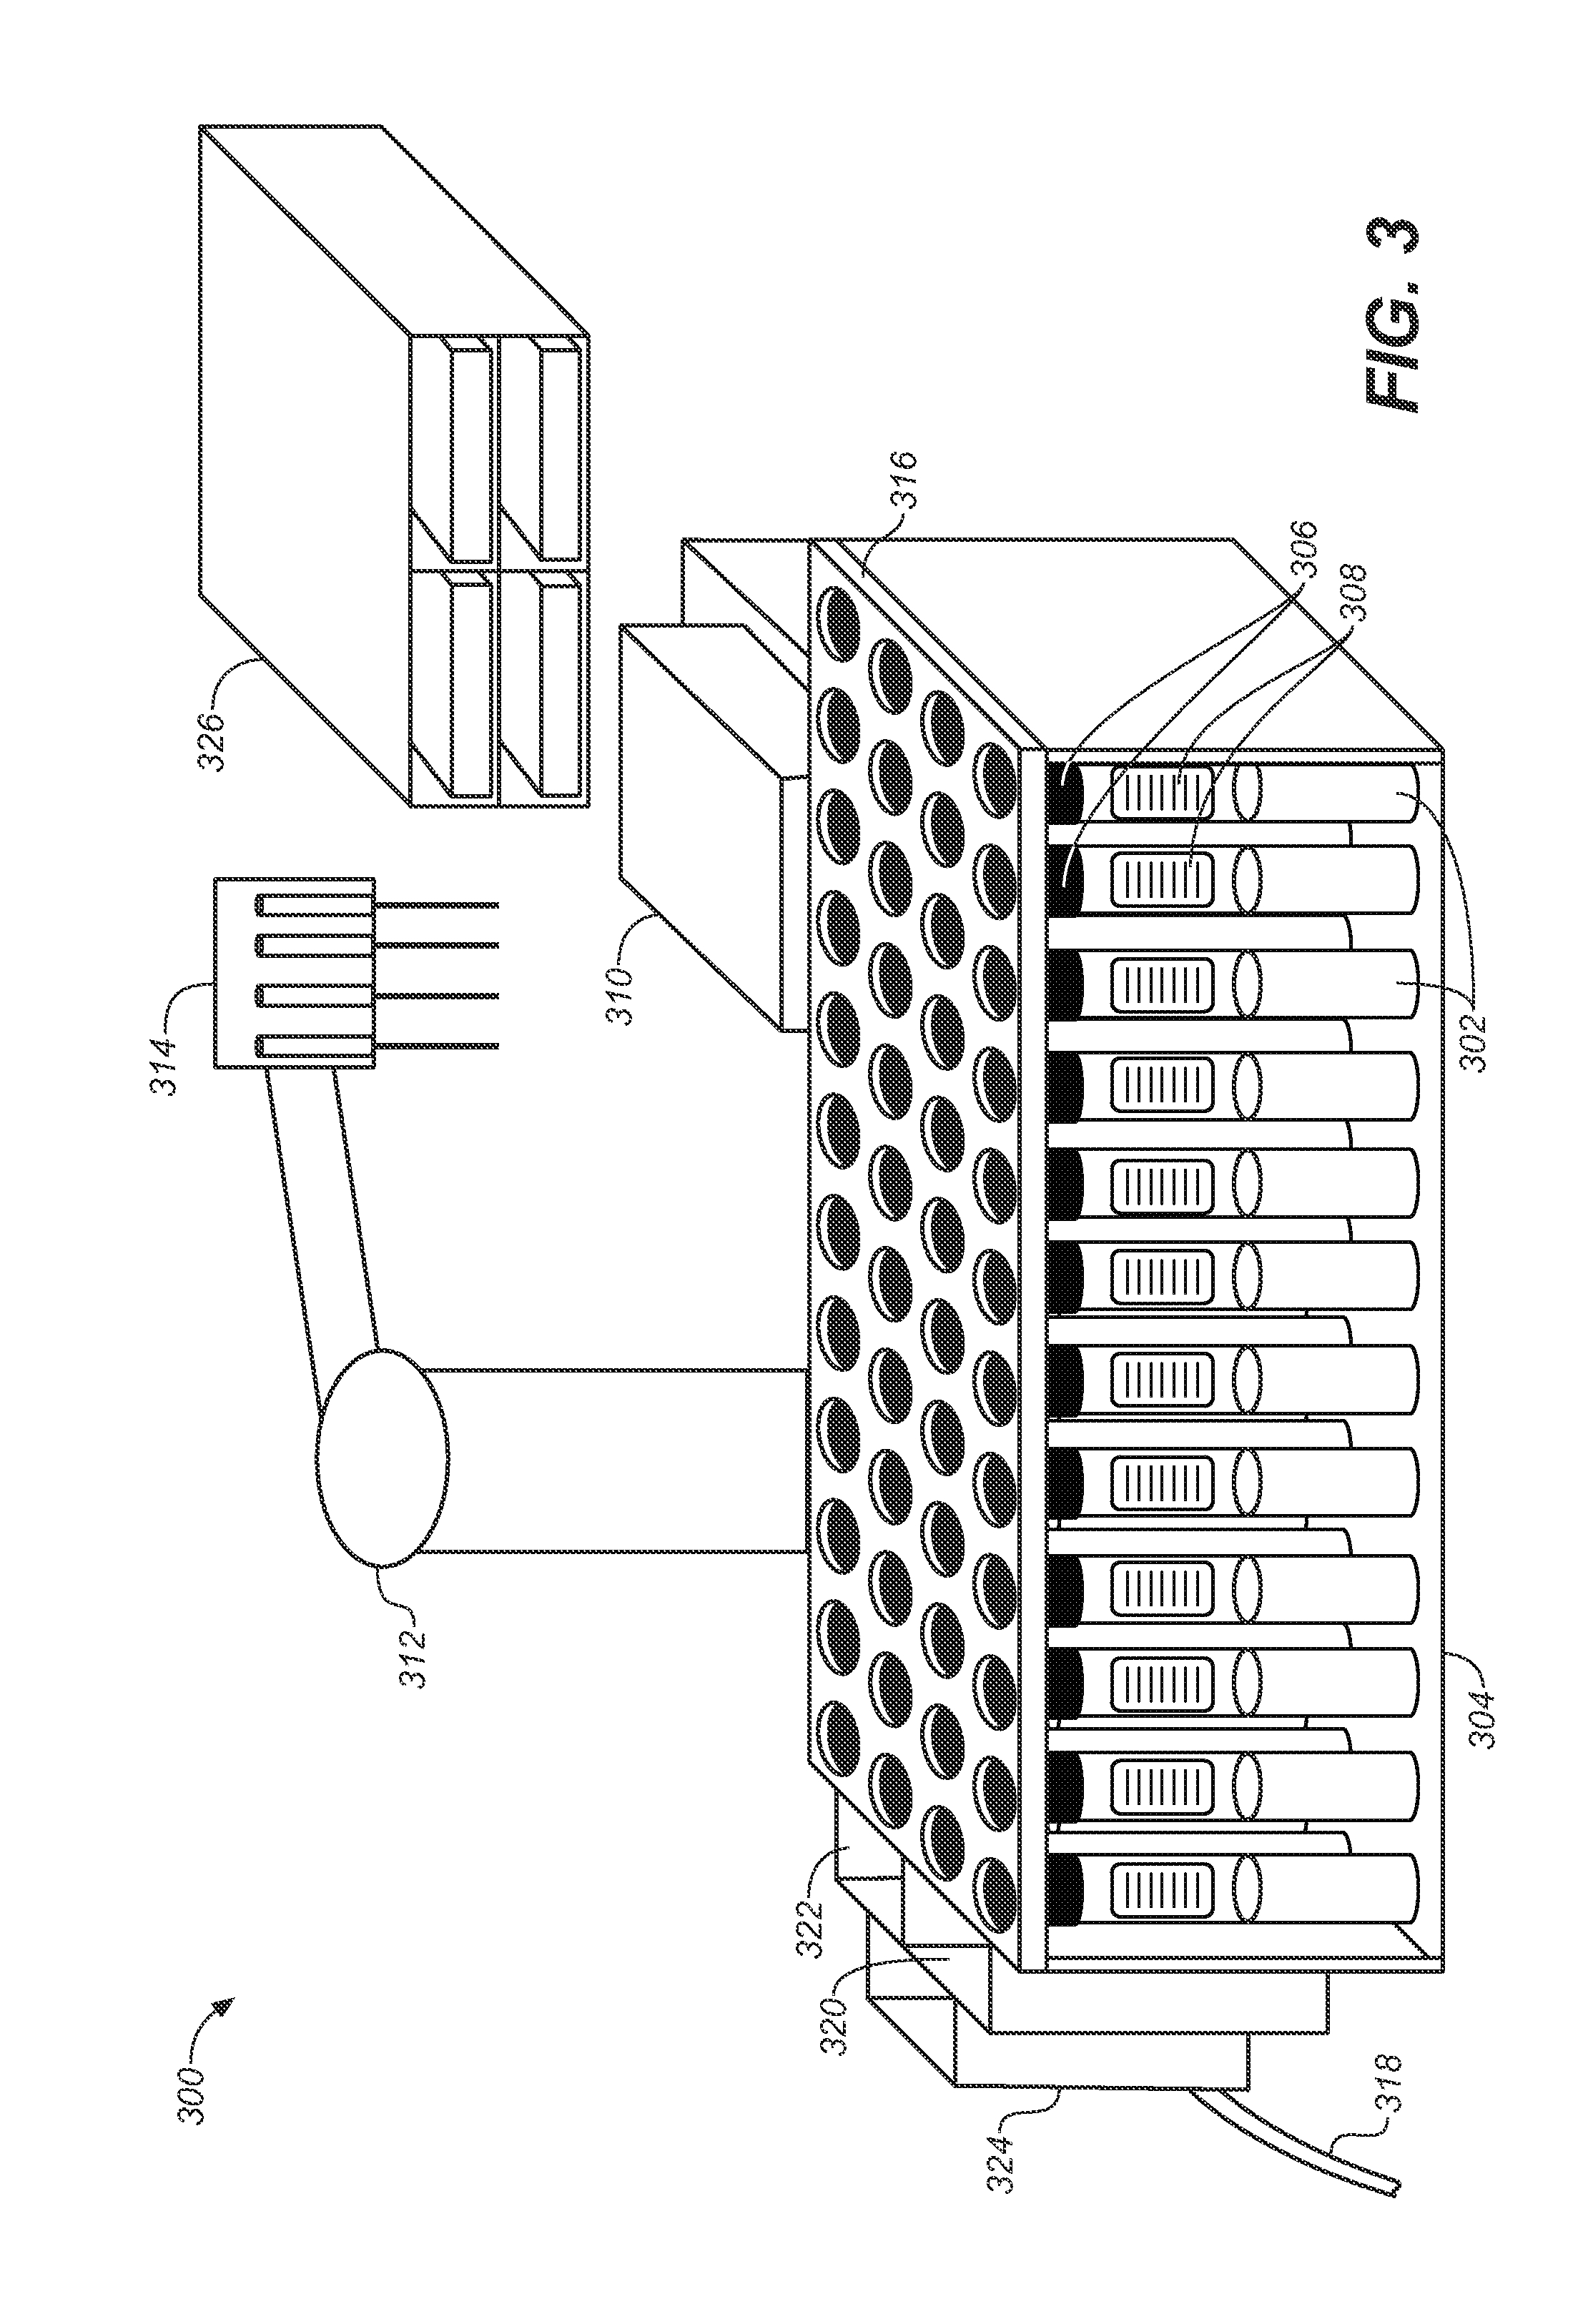 High-throughput sample processing systems and methods of use